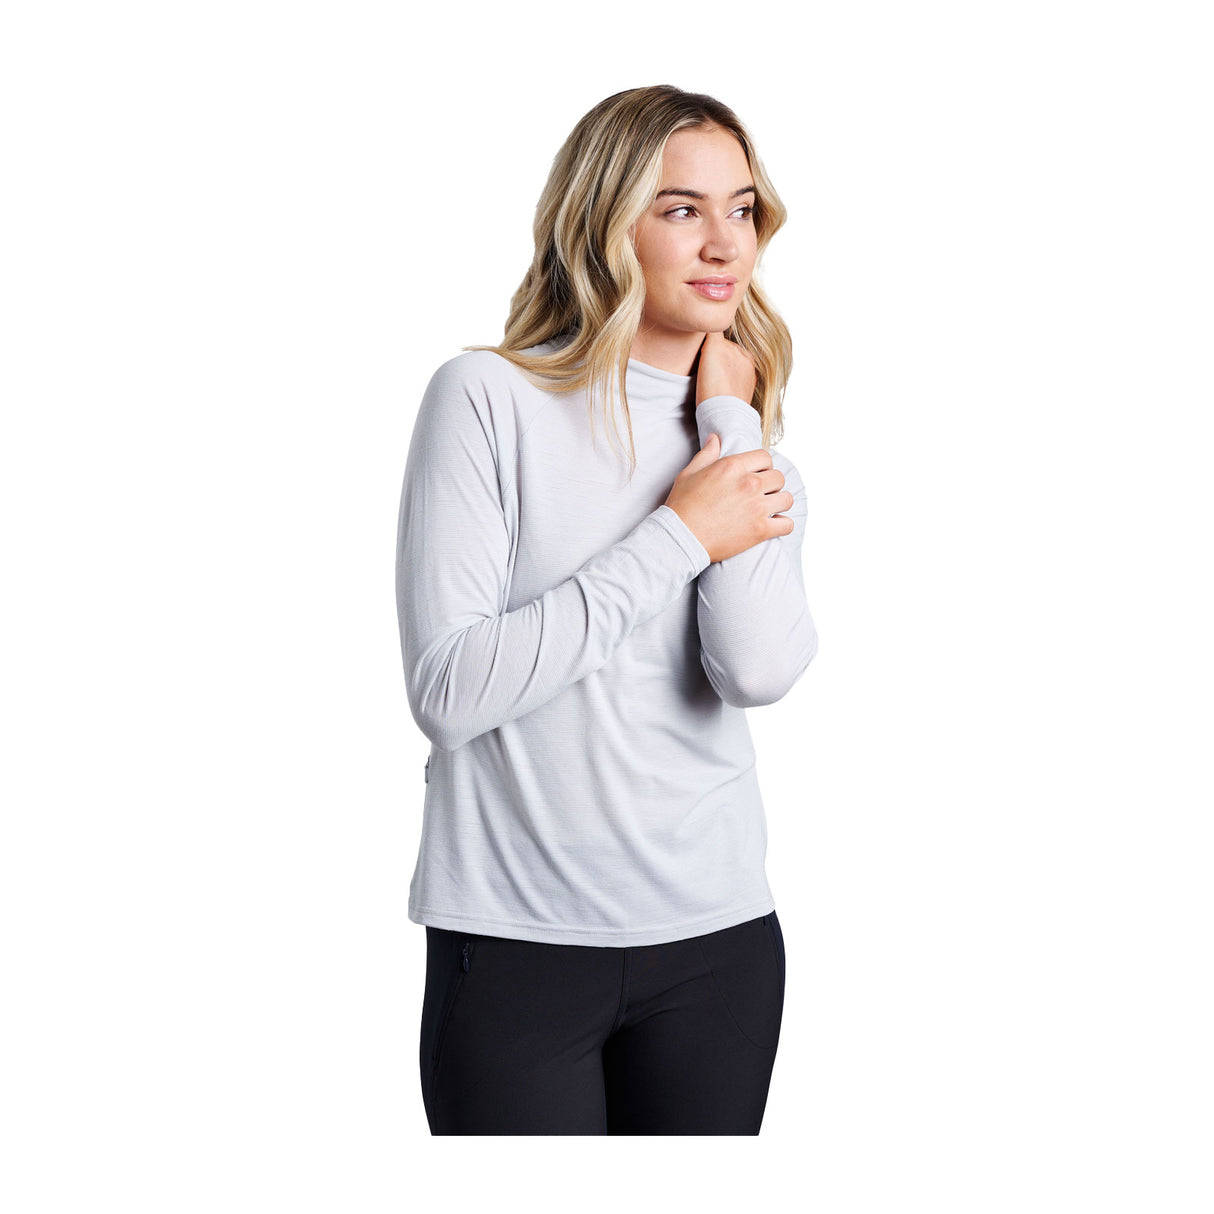 Kuhl Agility Pullover (Women) - Mist Apparel - Top - Long Sleeve - The Heel Shoe Fitters